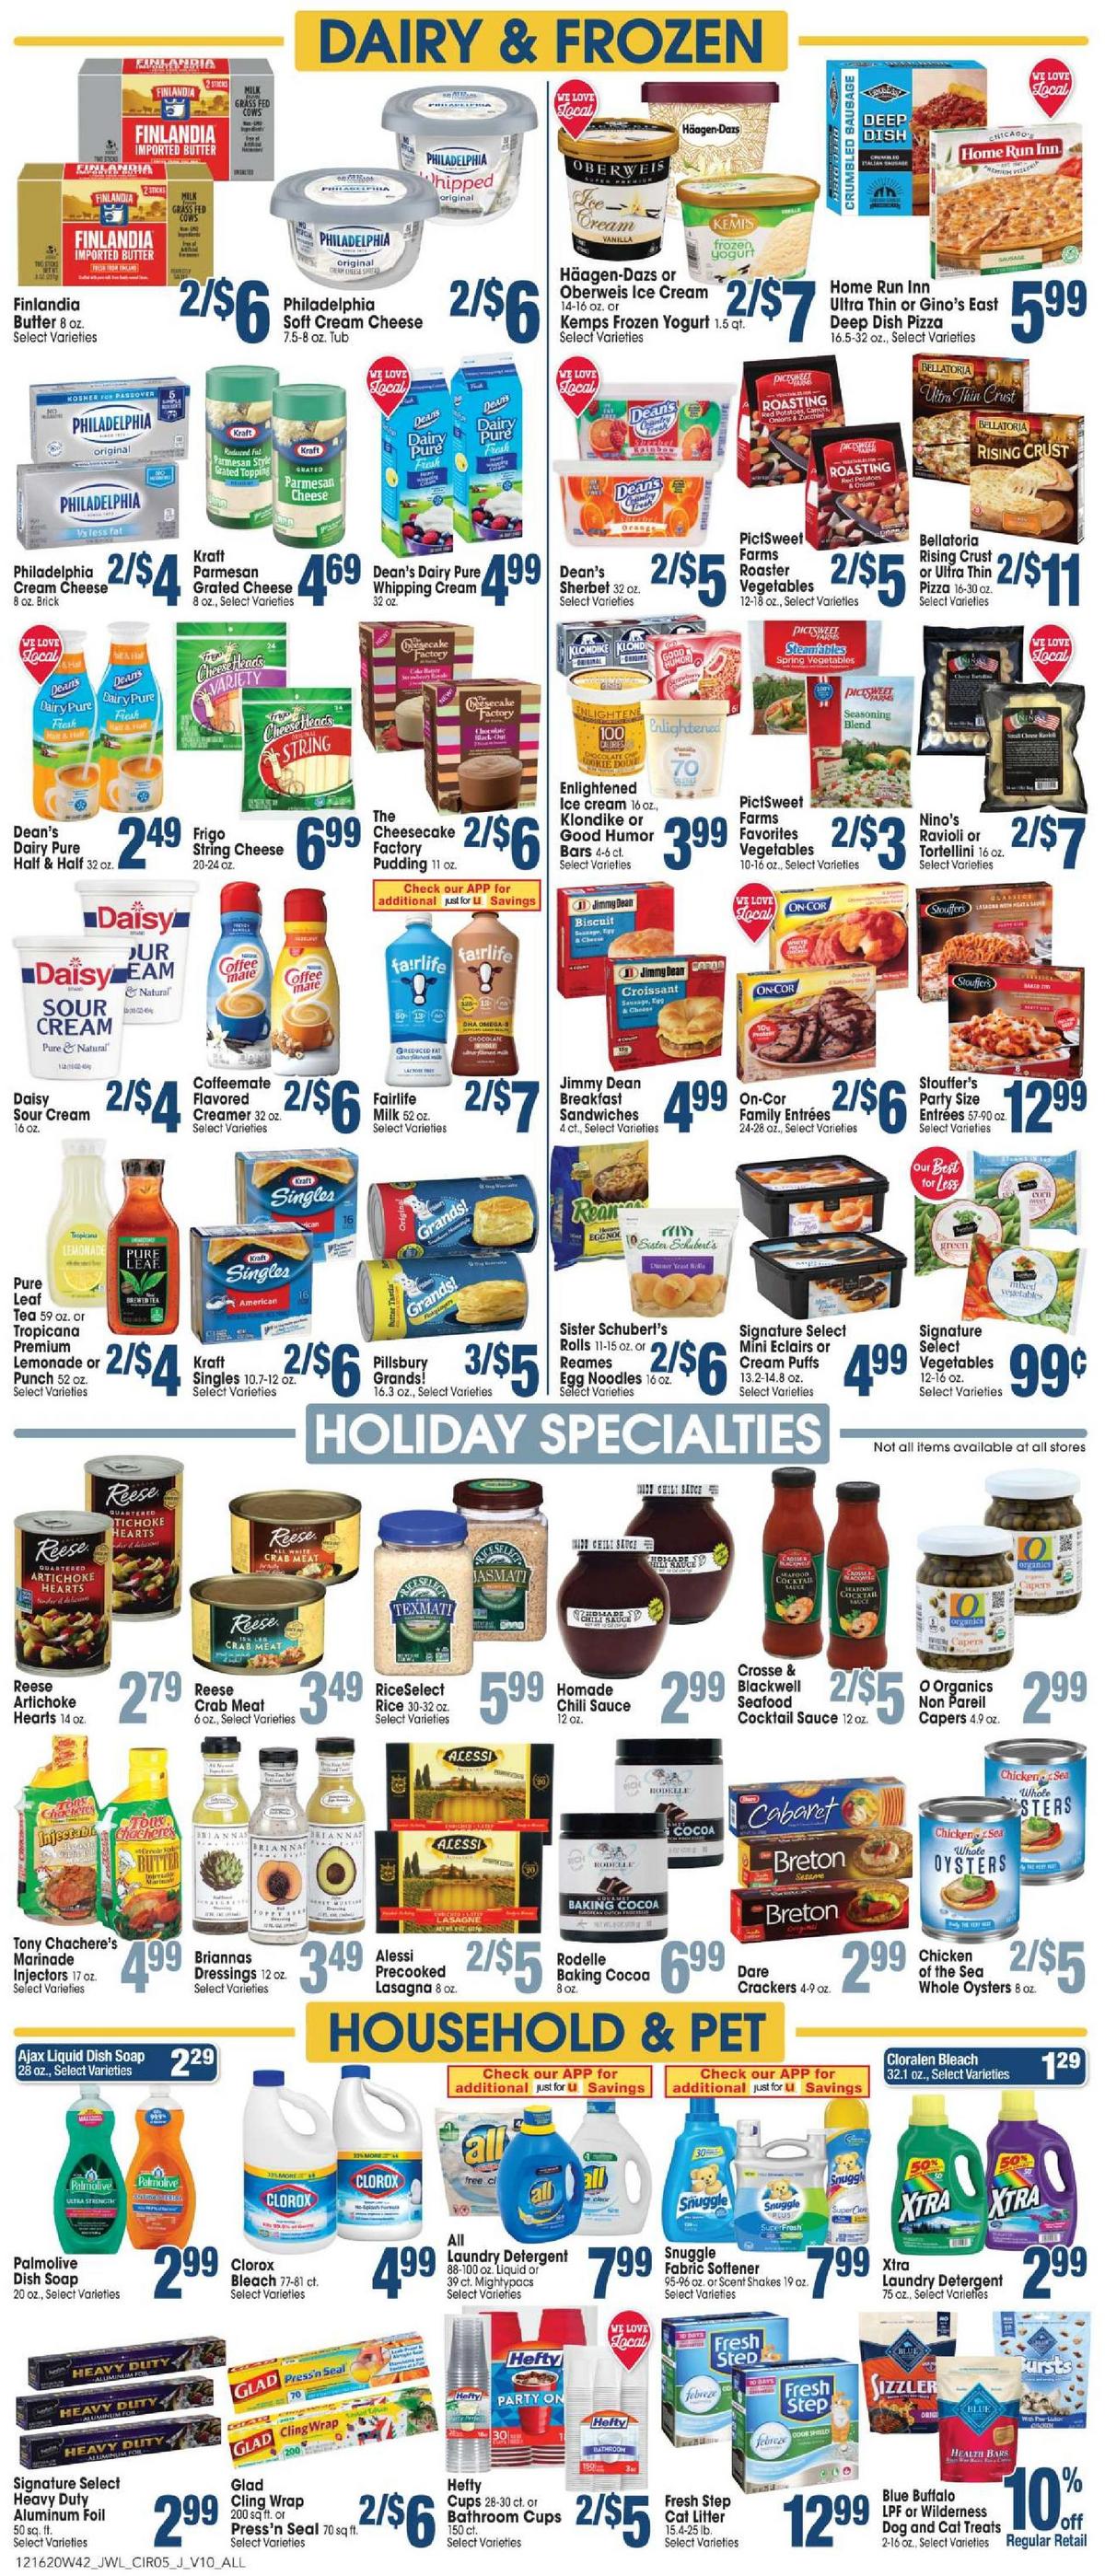 Jewel Osco Weekly Ad from December 16